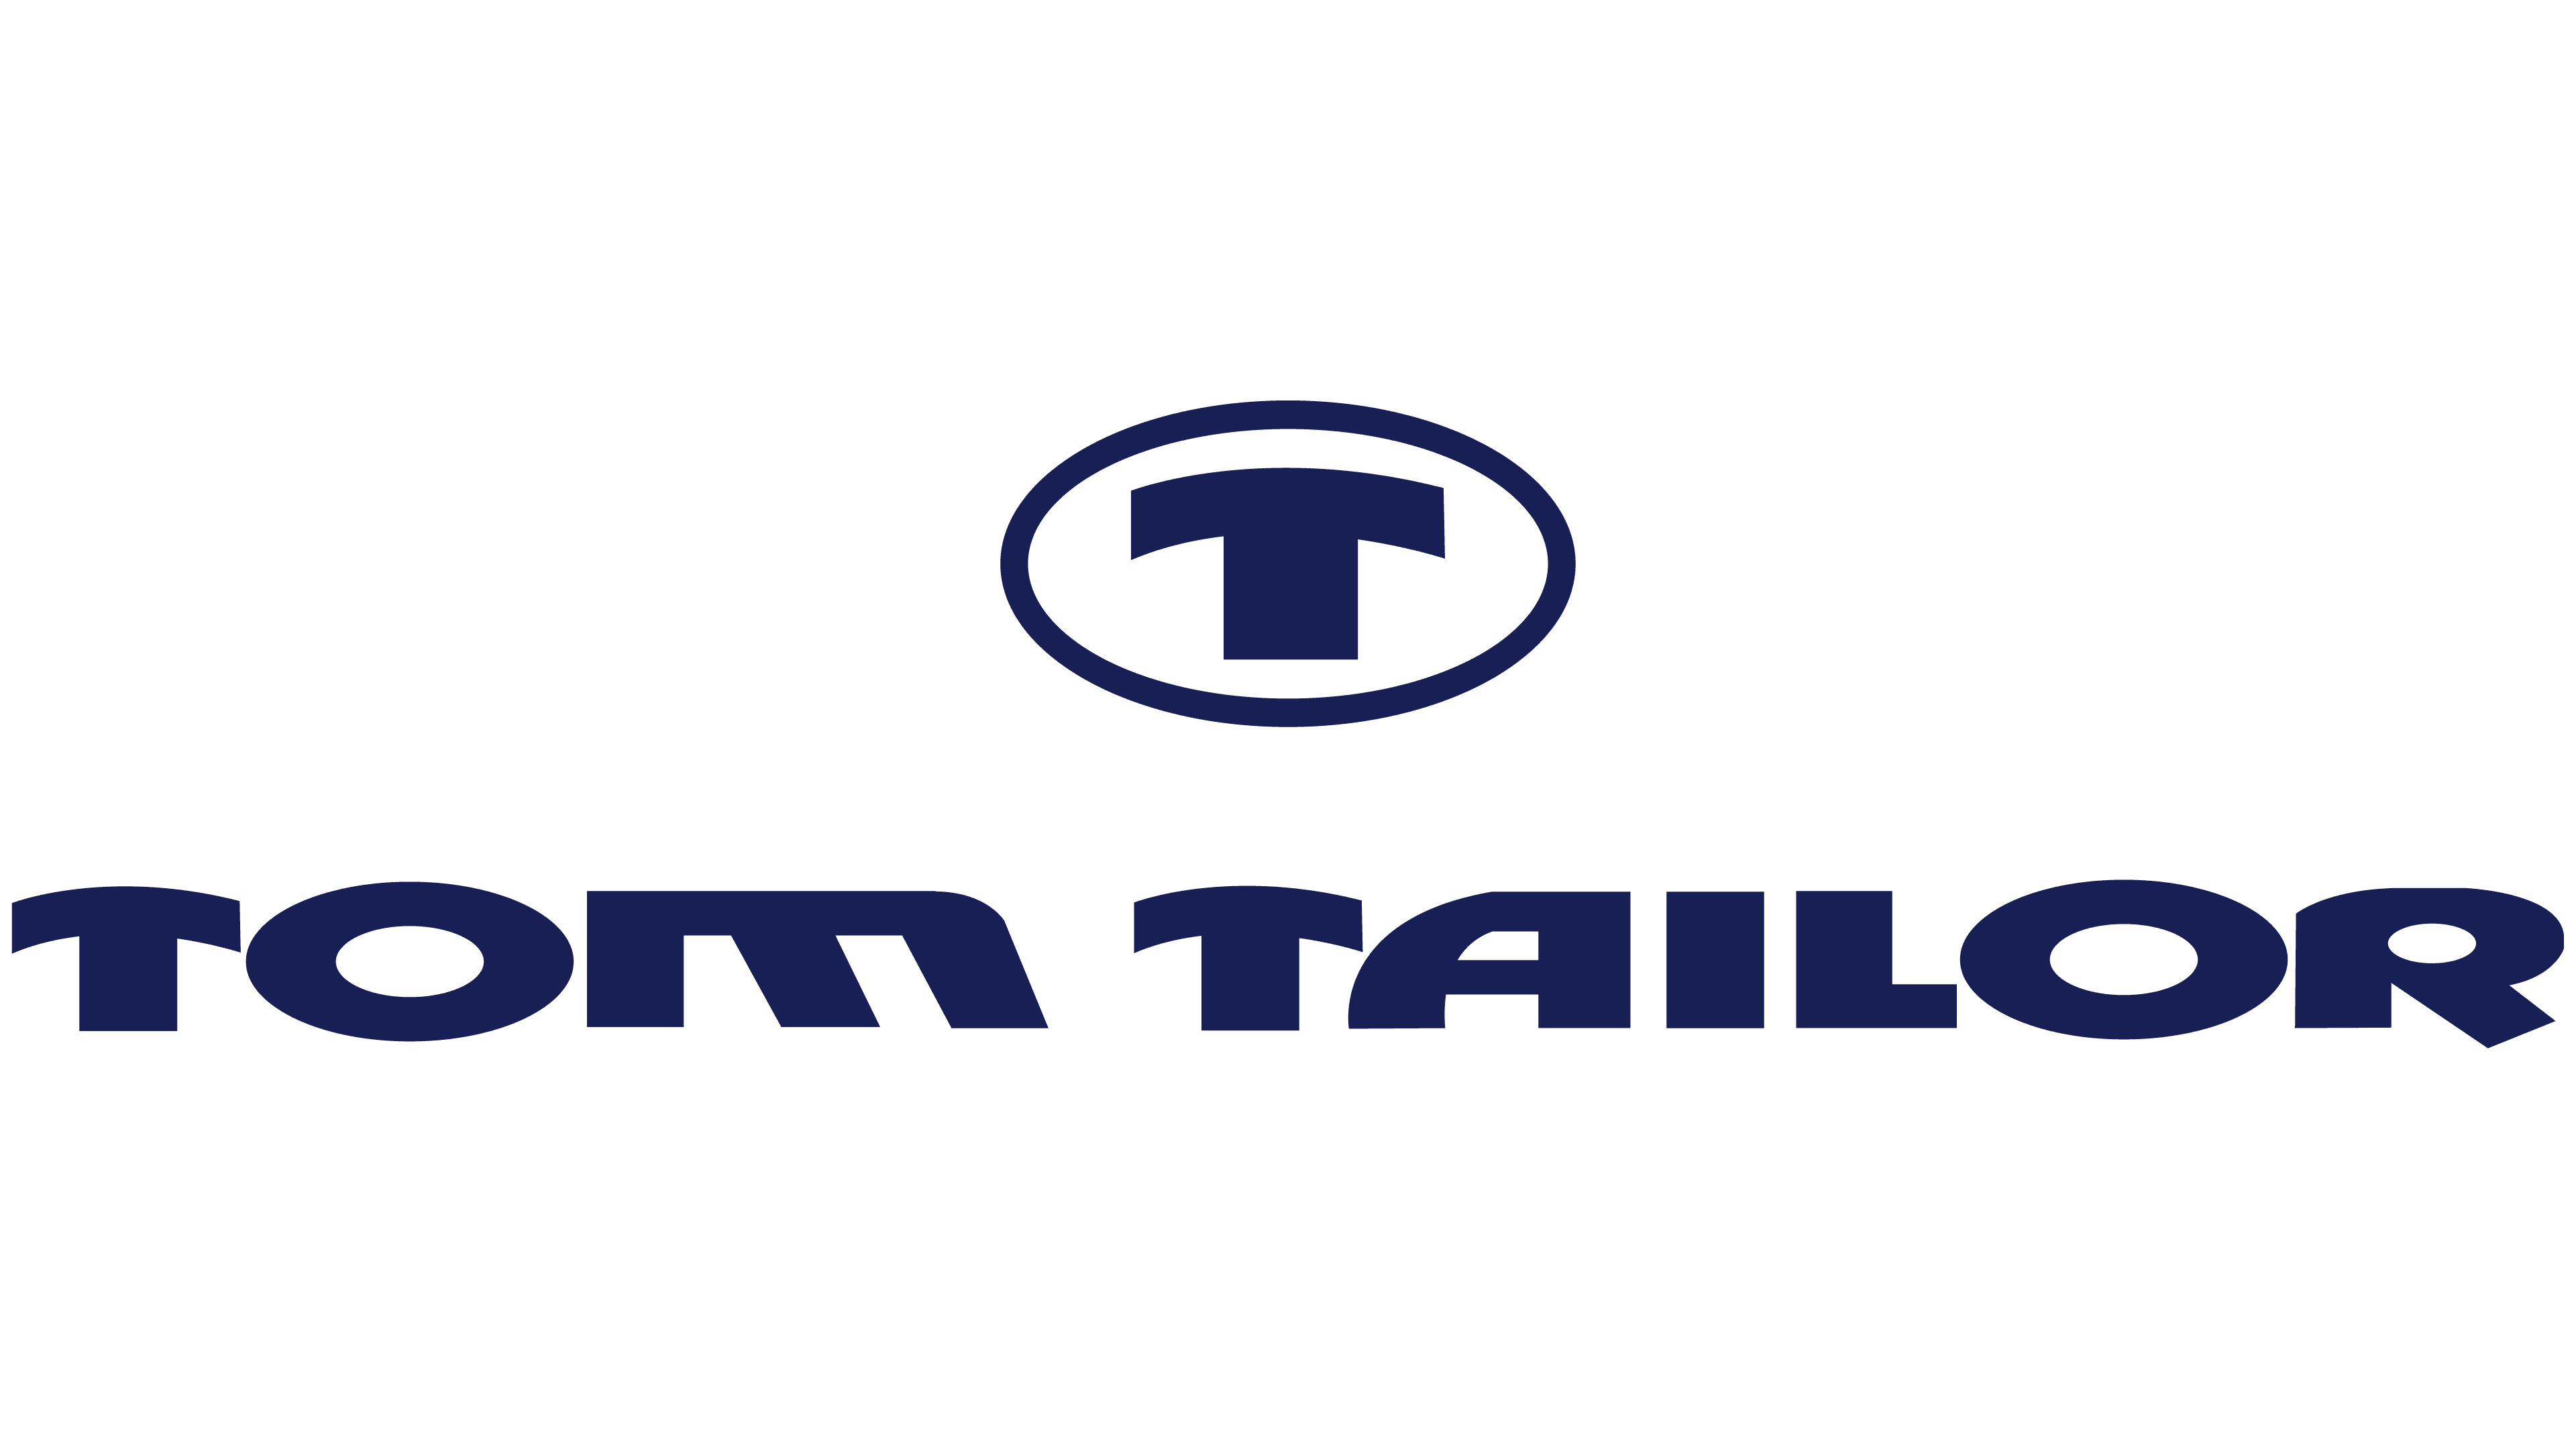 PNG, Tom and symbol, Logo meaning, Tailor history, brand